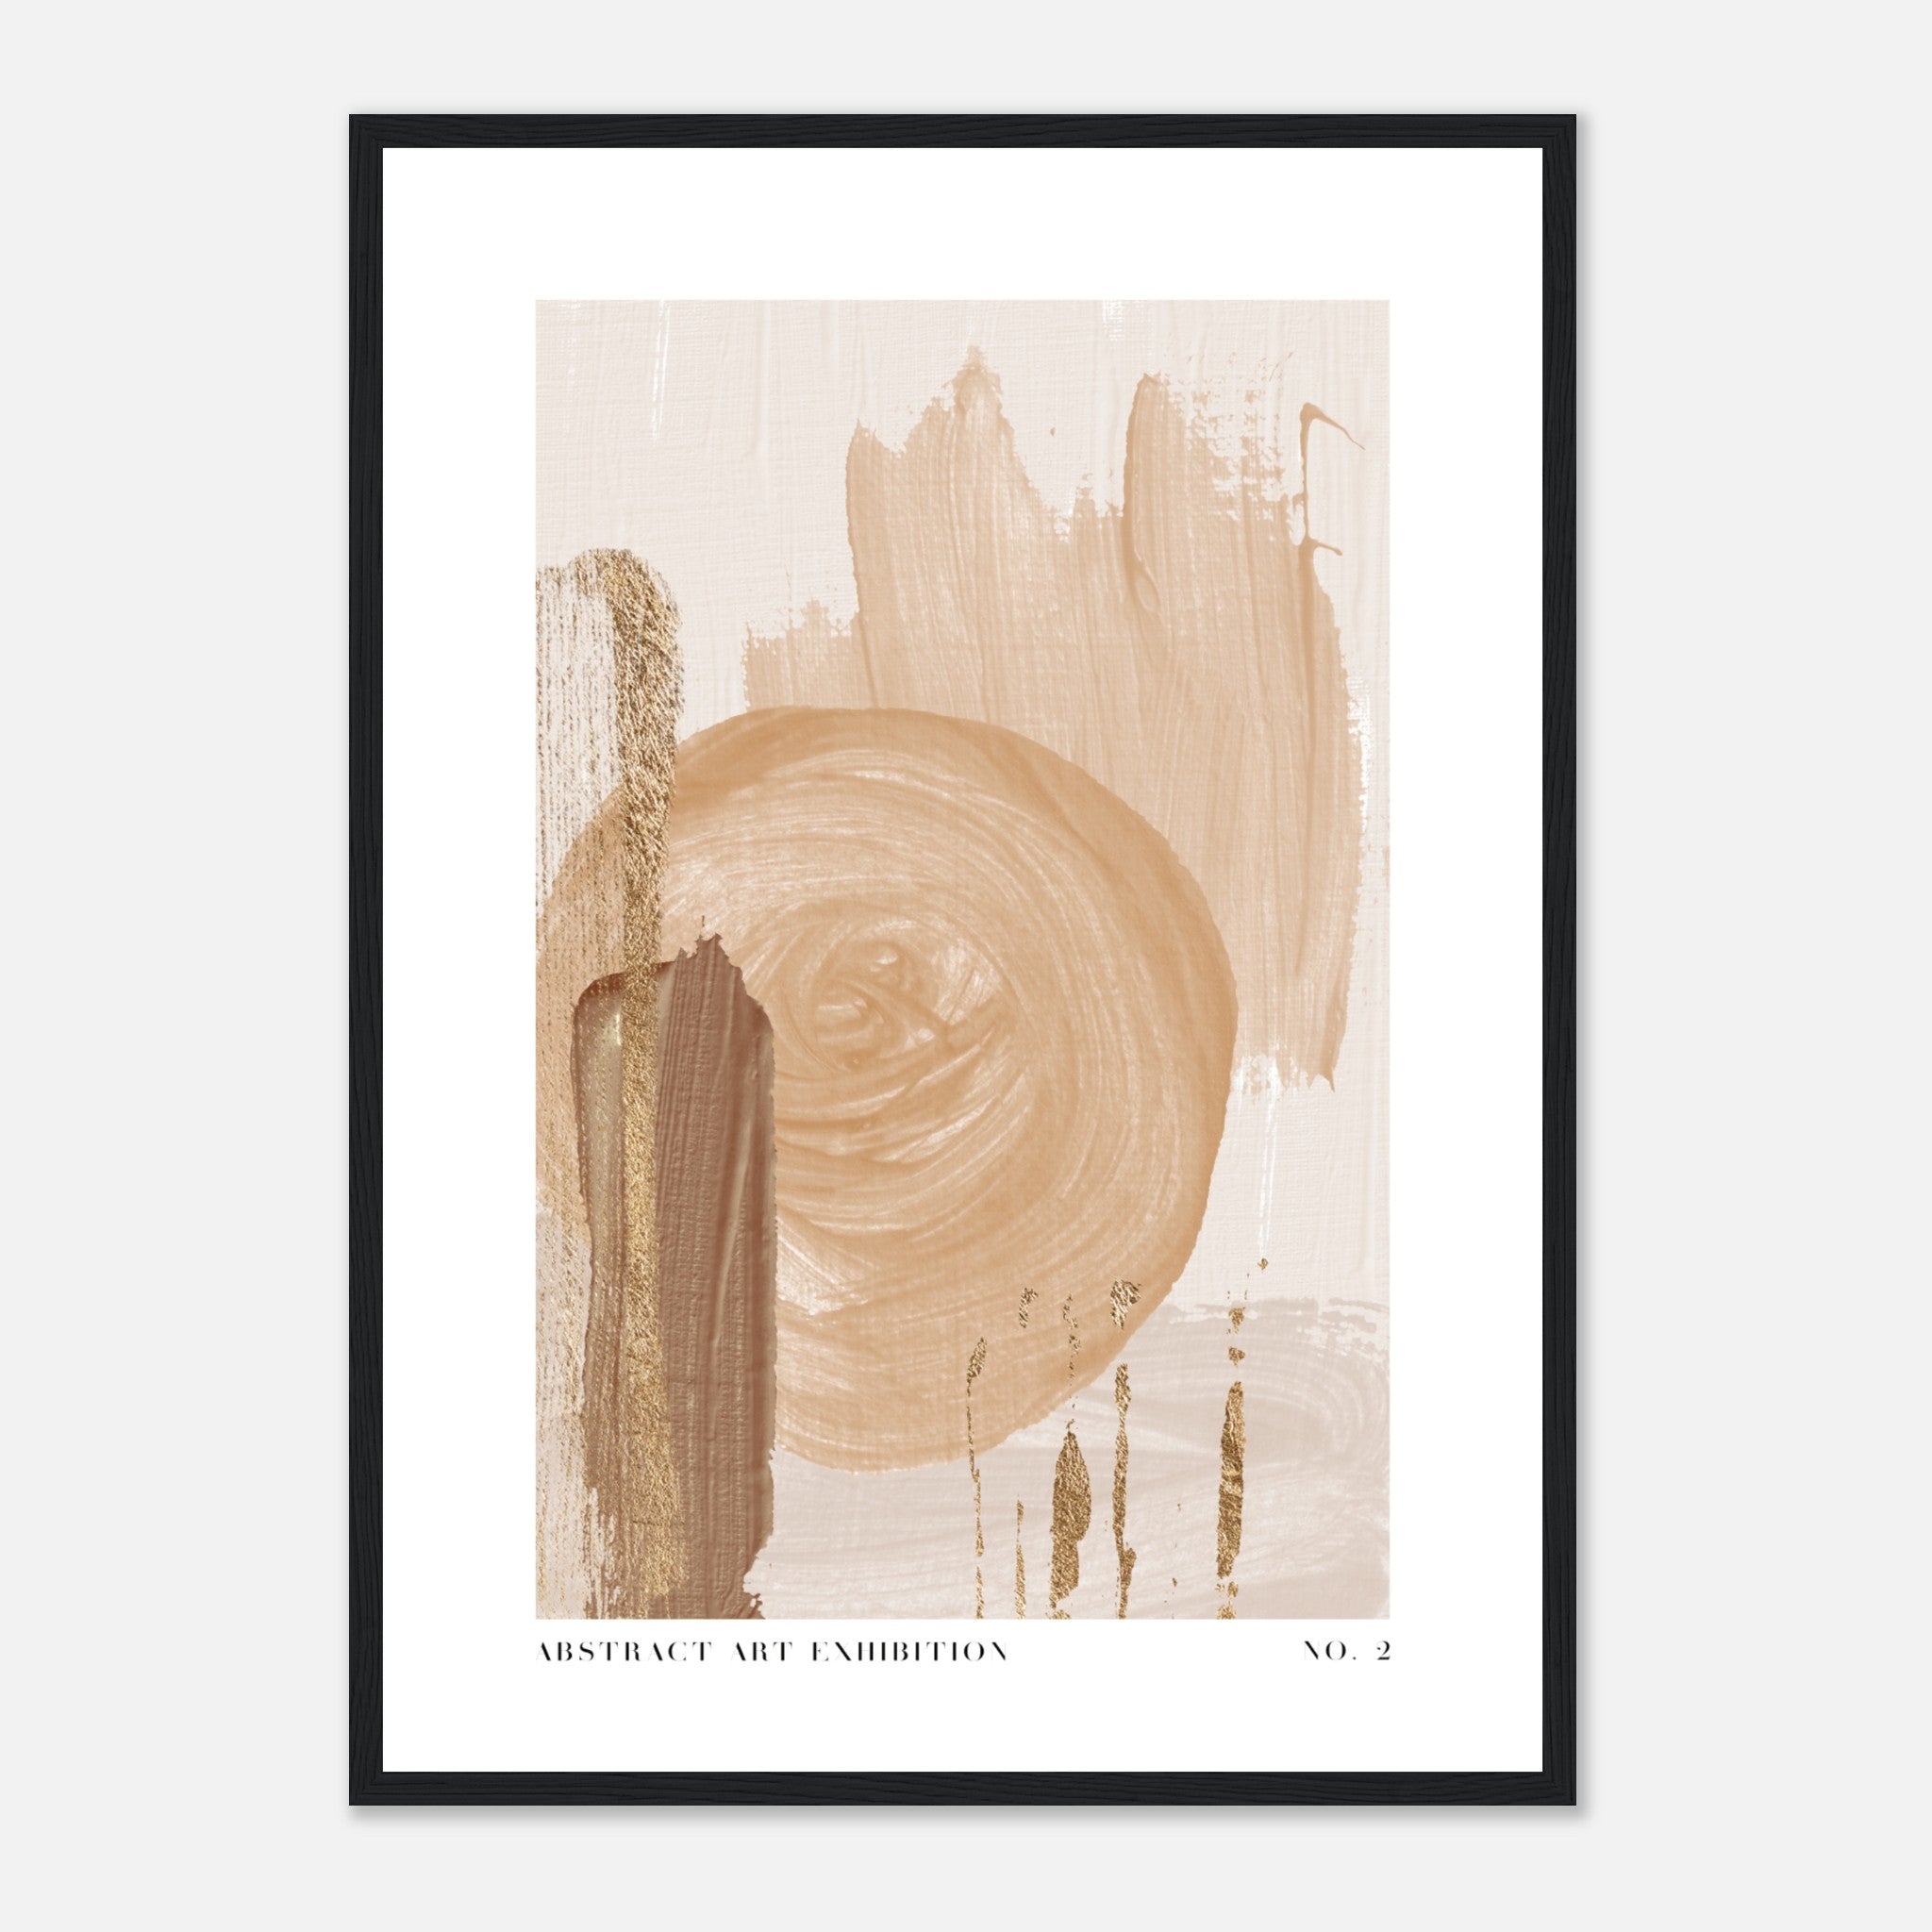 Neutrals - Abstract Art Exhibition No. 2 Poster